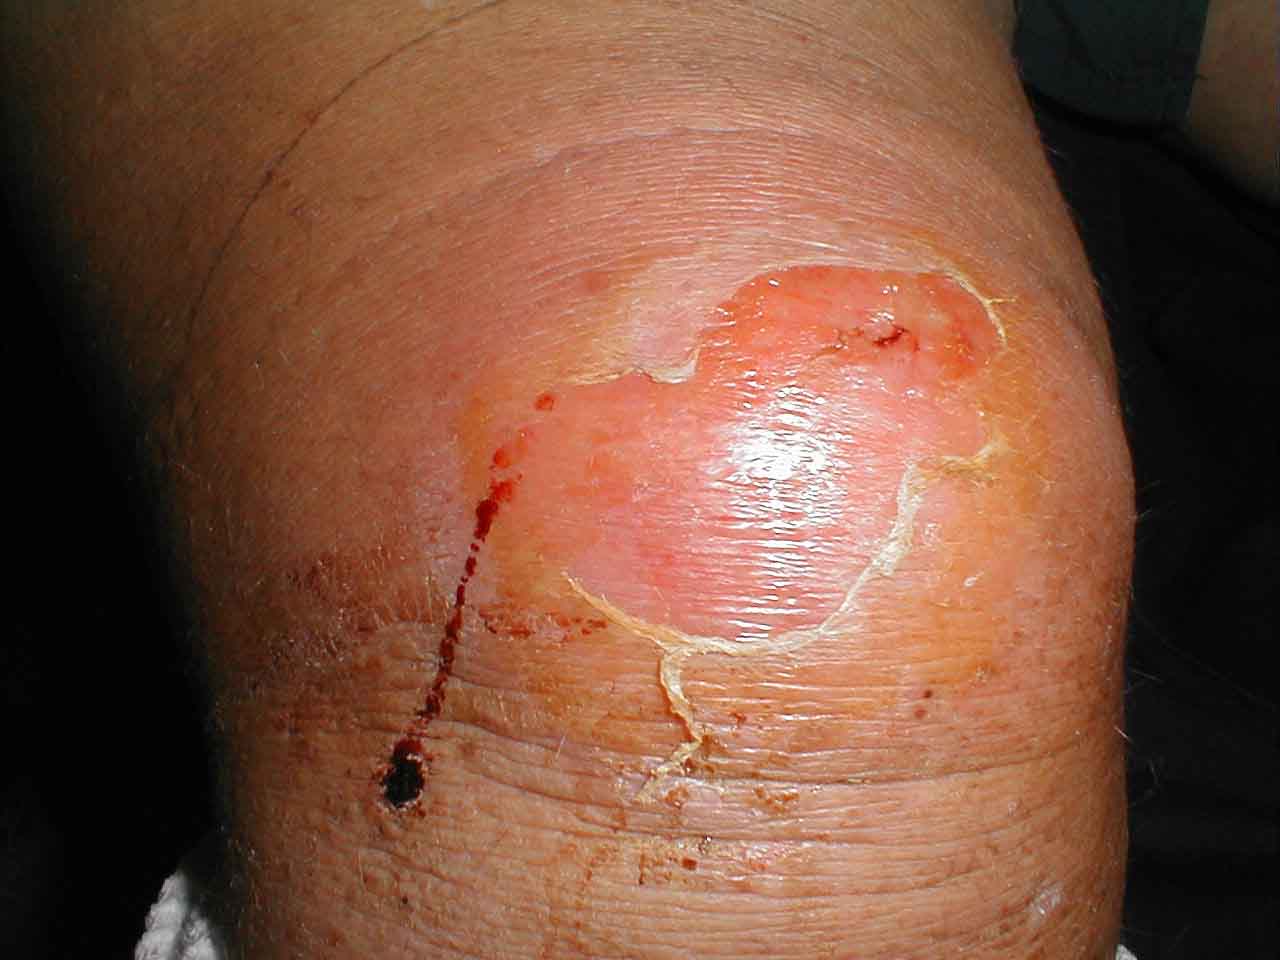 Prepatellar Bursitis: Redness and swelling of prepatellar bursa caused by bacterial infection. Inflammation and edema have led to desquamation.